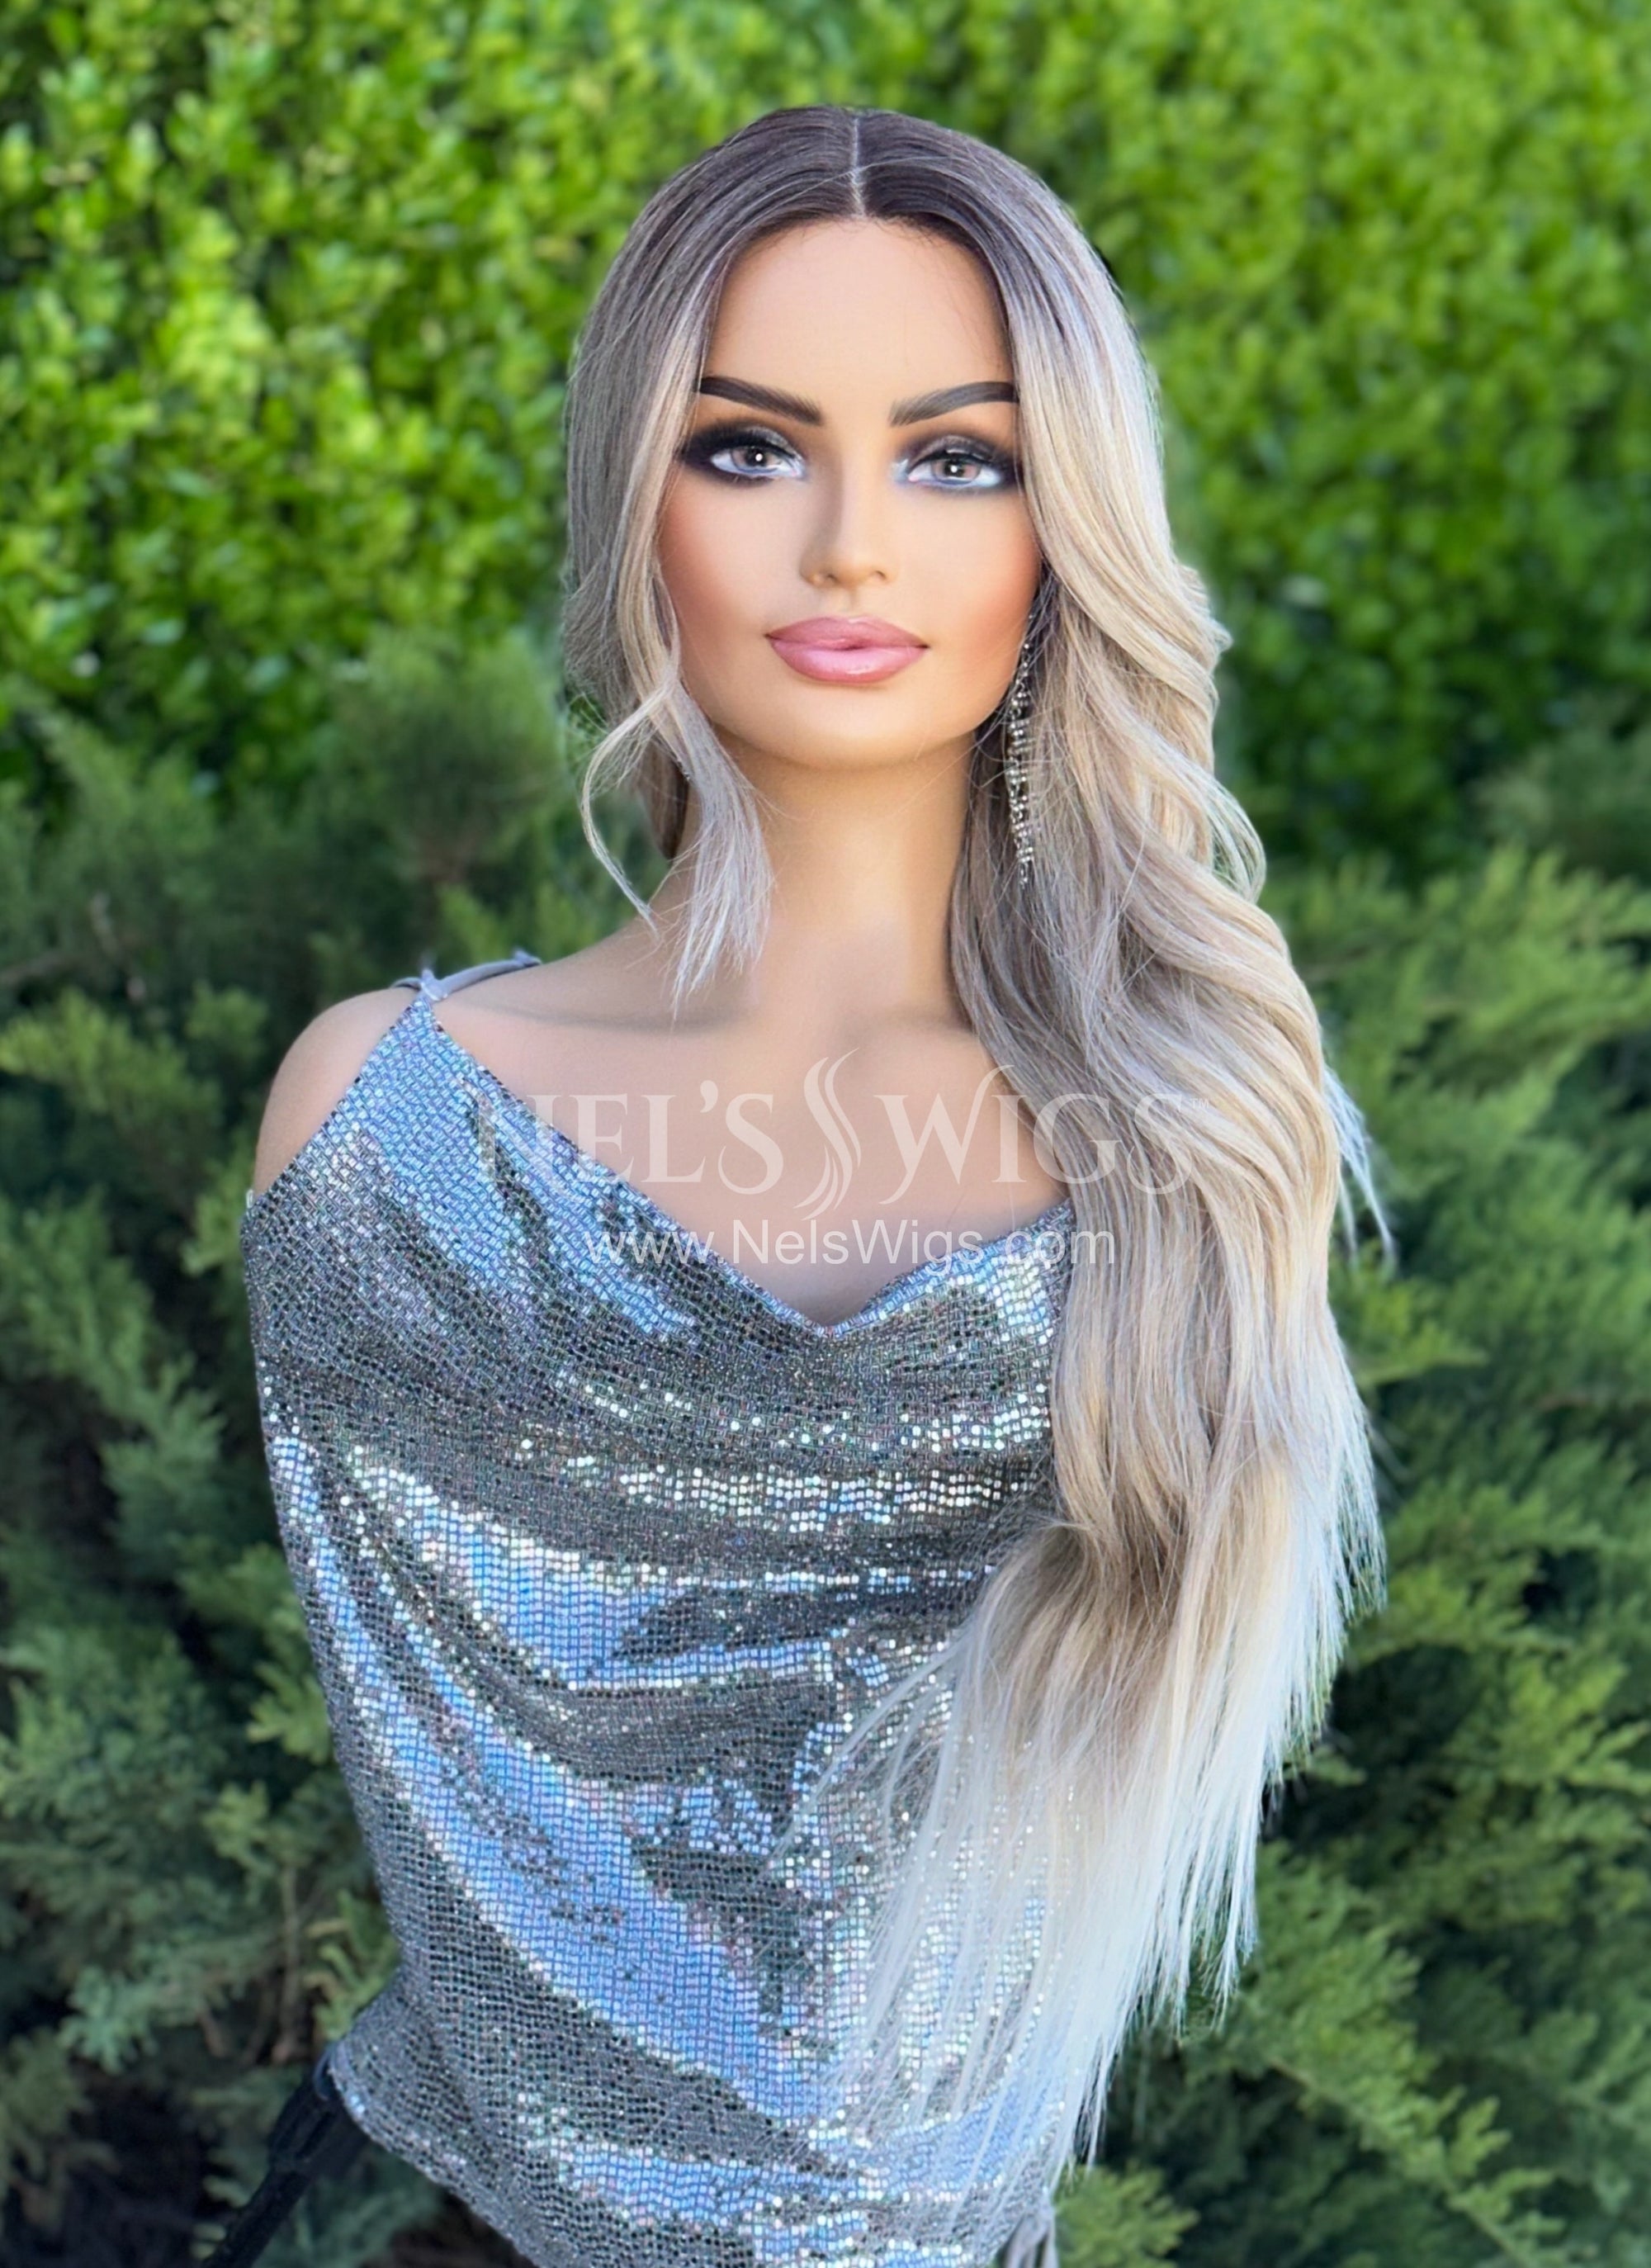 Bianca - Cream and Icy Blonde with Front Layers